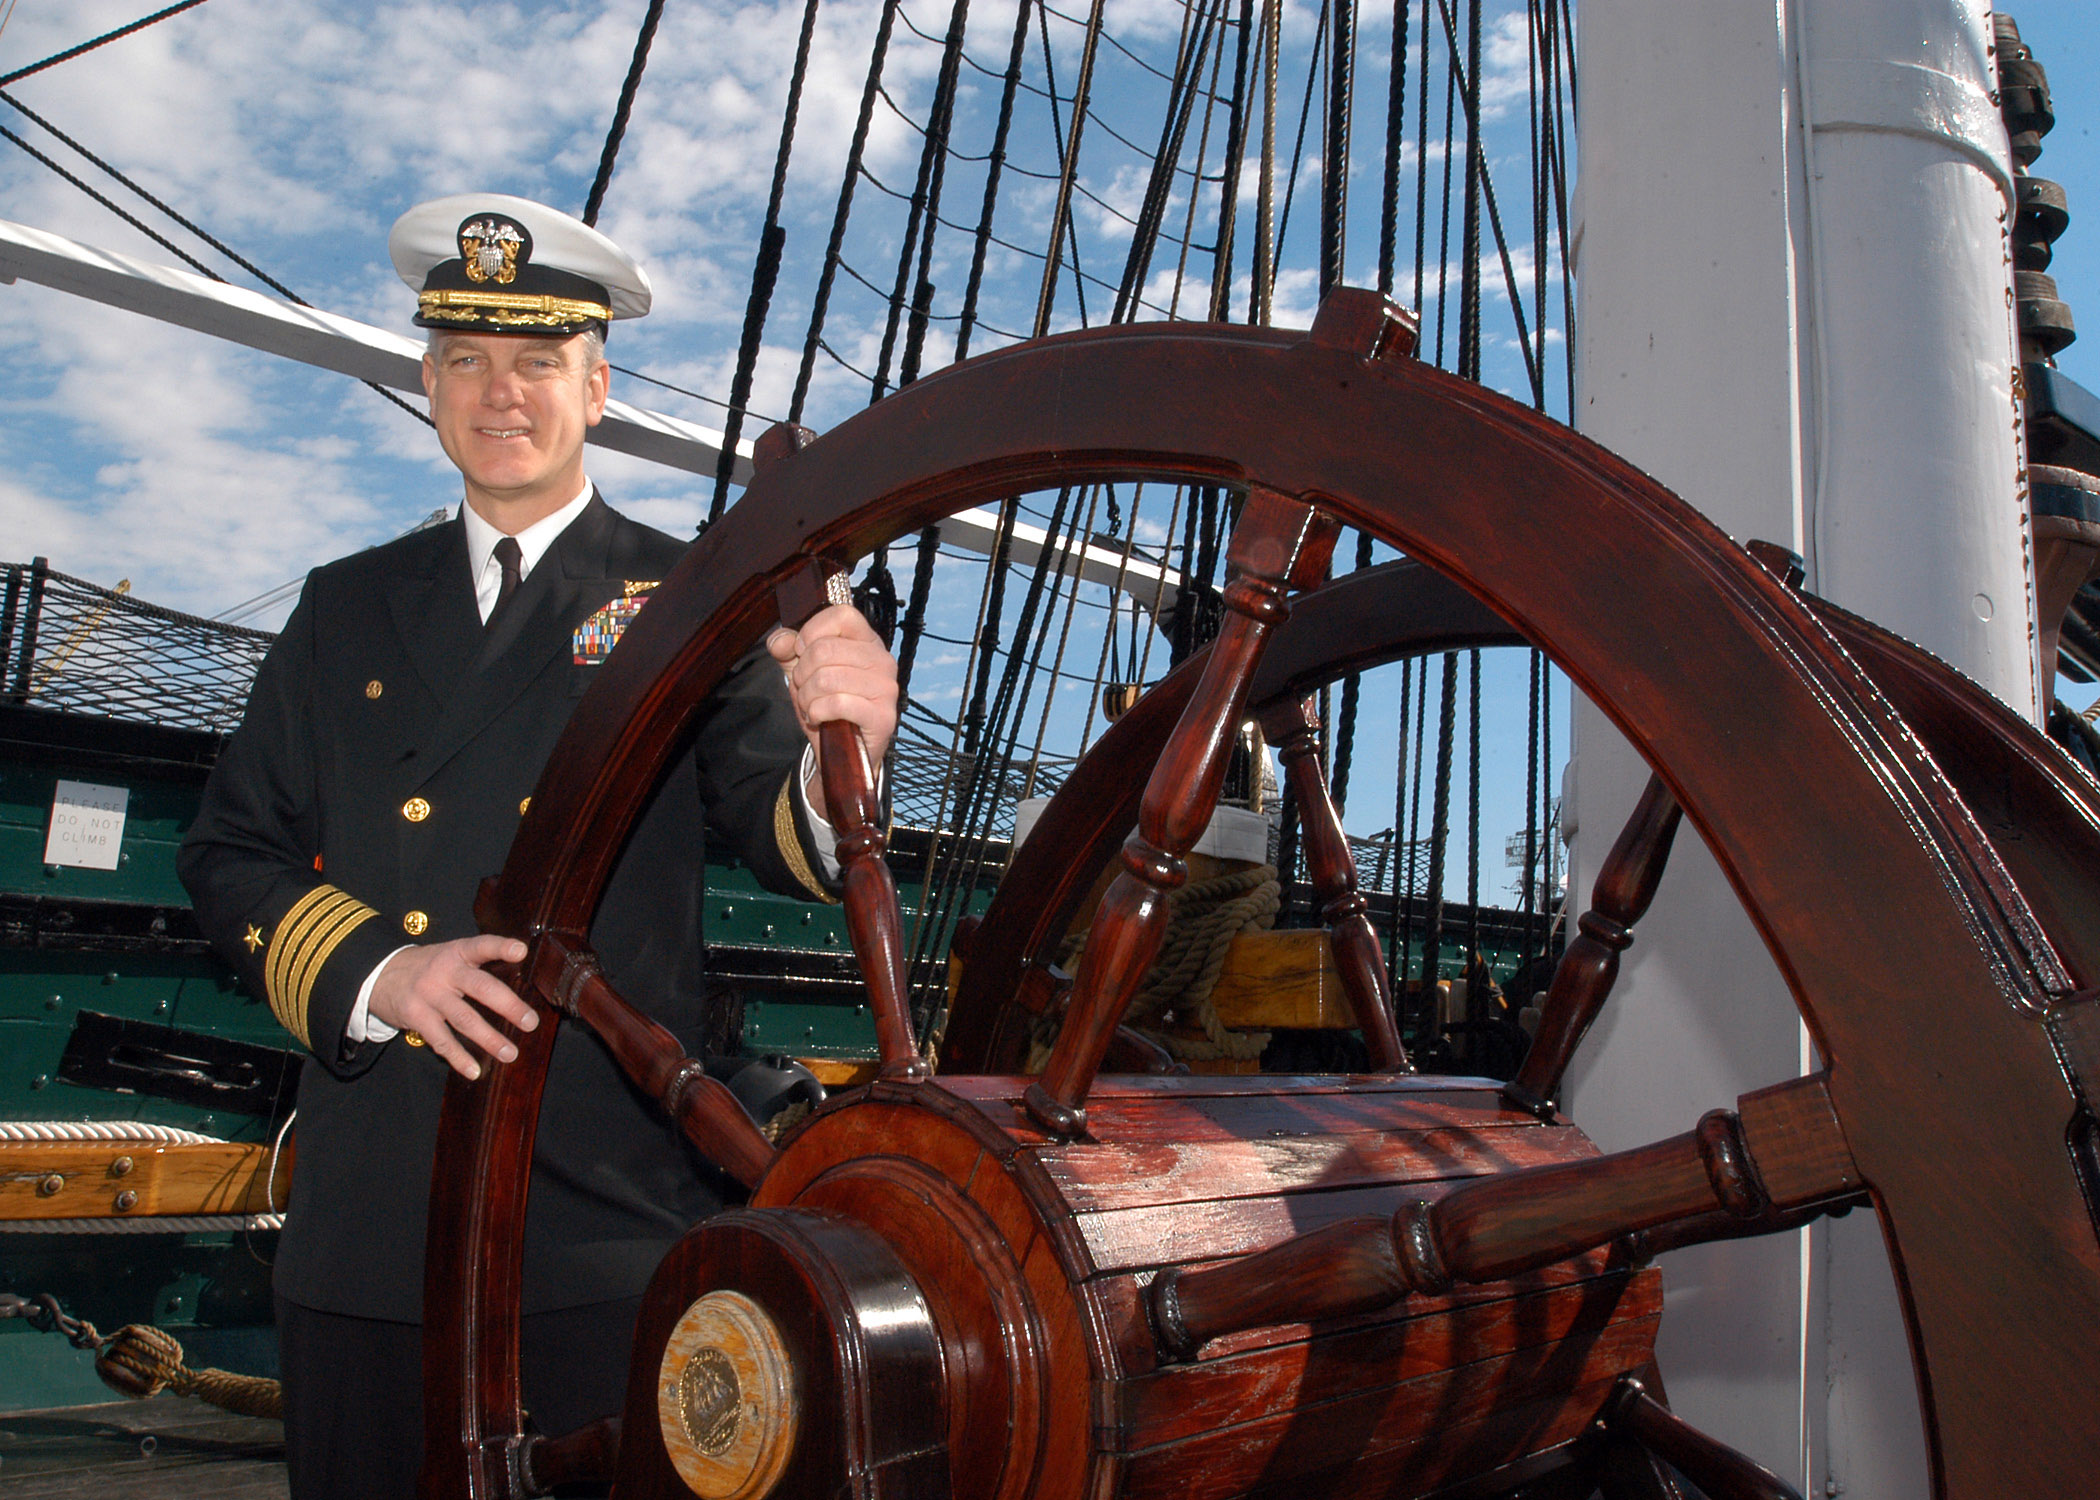 US Navy 070303-N-2541H-058 Capt. Todd A. Zecchin, commanding officer of USS John F. Kennedy (CV 67), takes the helm of the Navy^rsquo,s oldest commissioned ship, USS Constitution